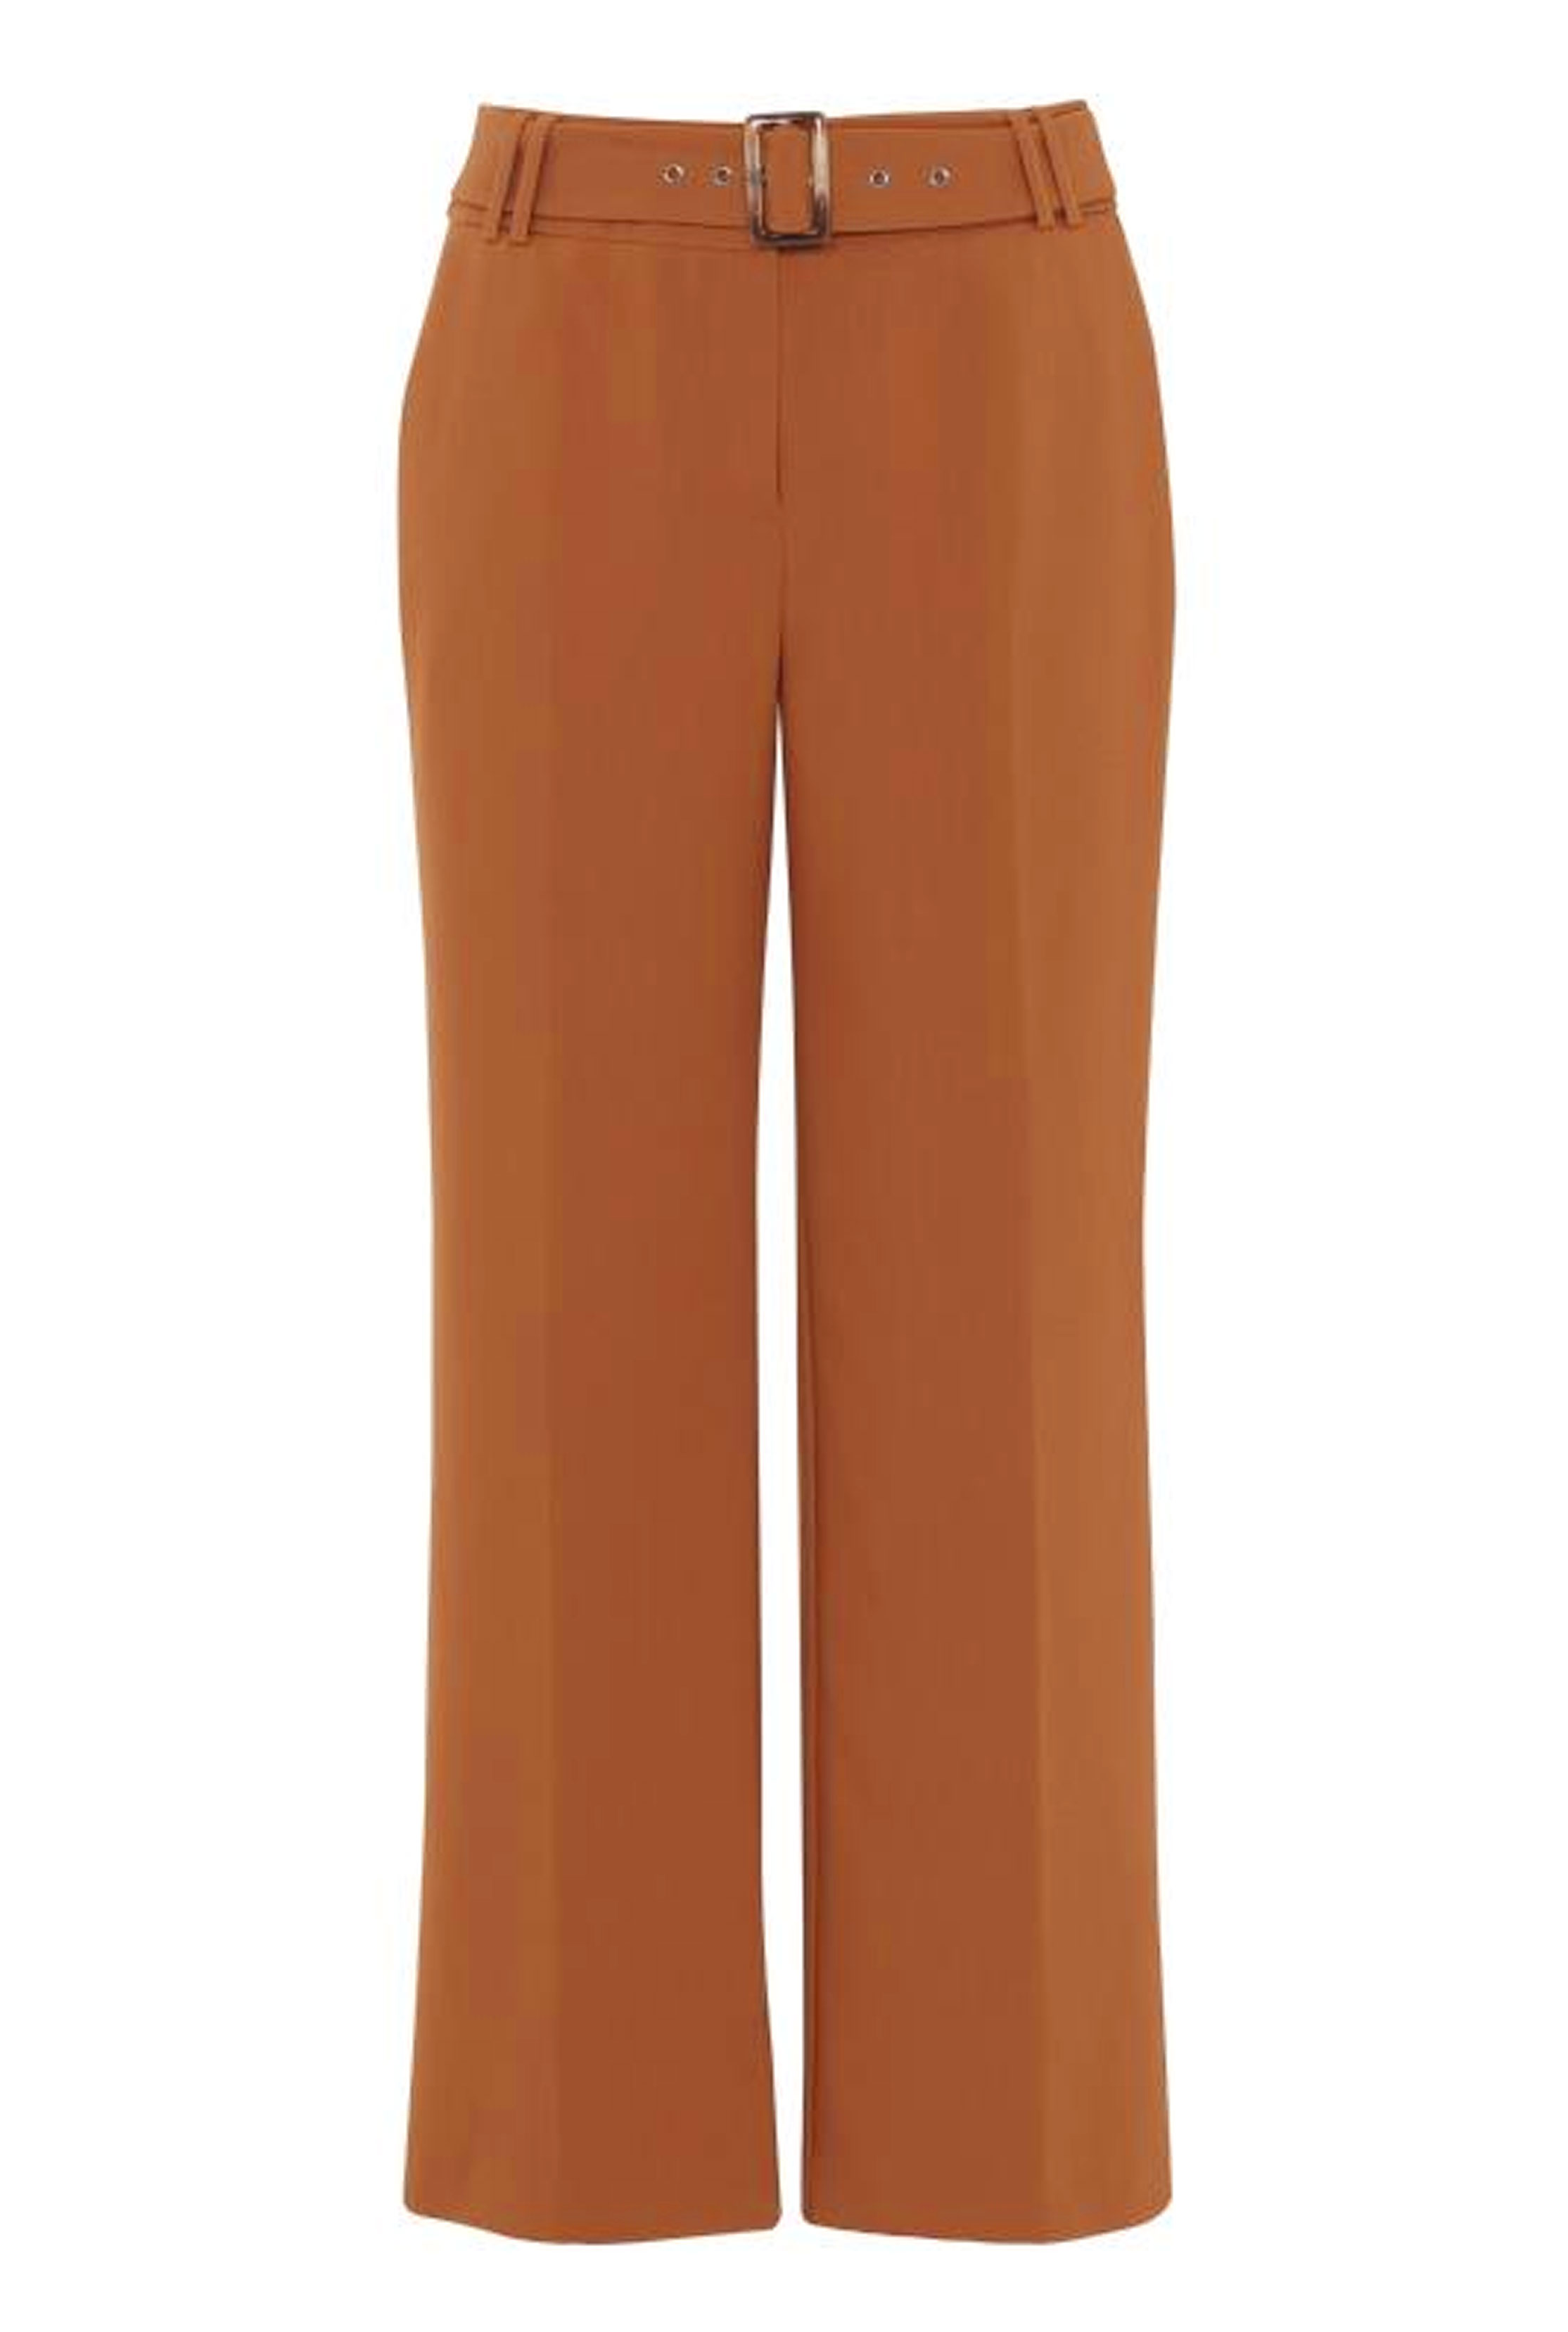 Brown Belted Culotte Trousers | Long Tall Sally